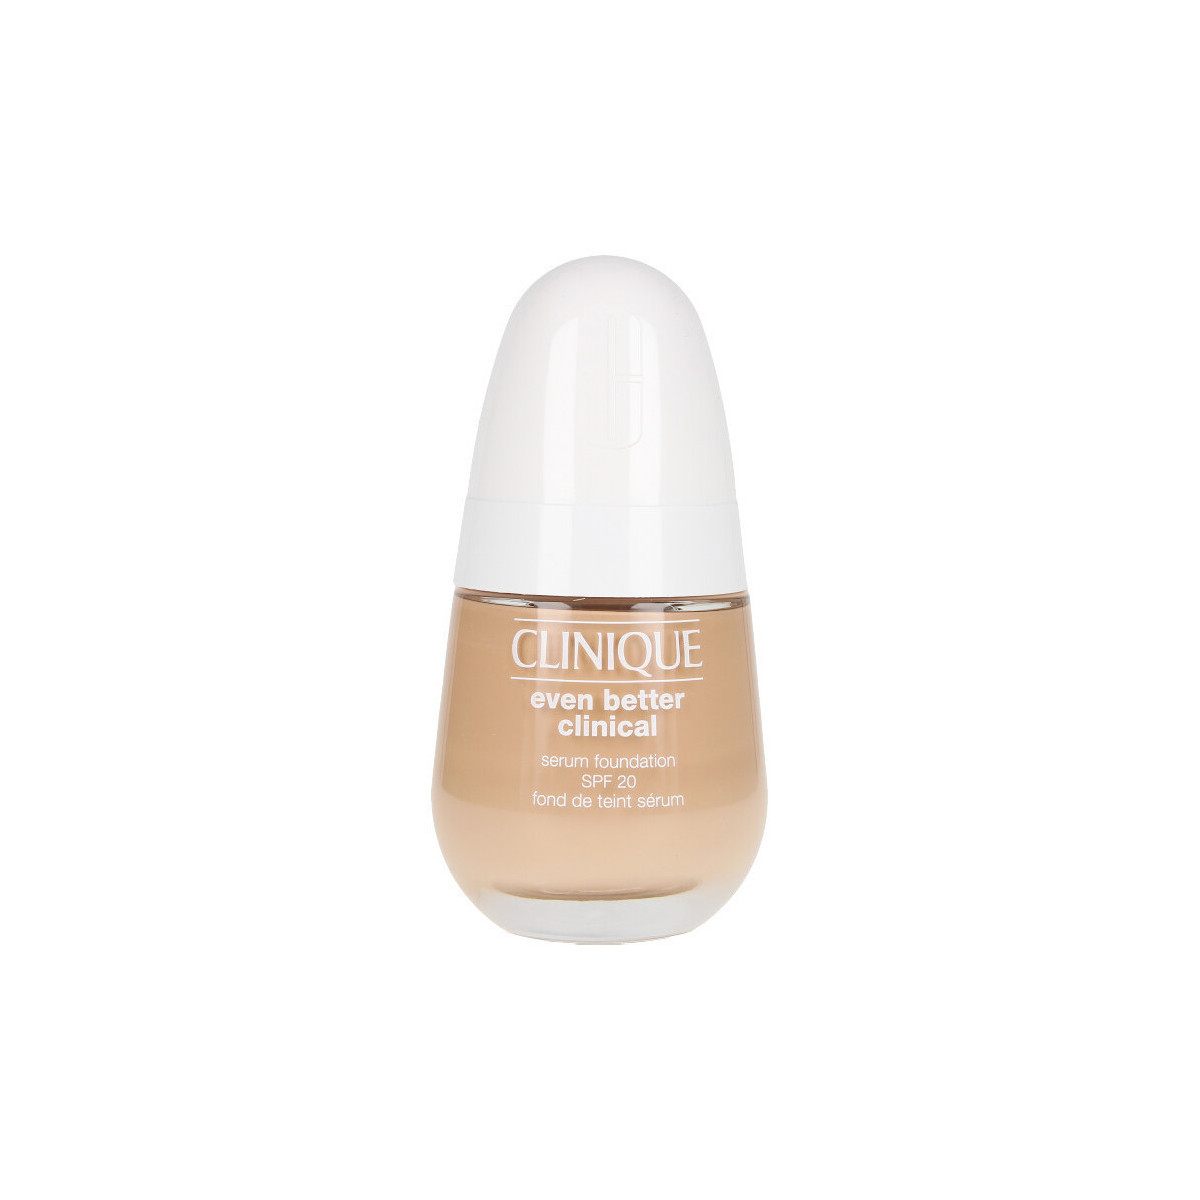 Beauty Make-up & Foundation  Clinique Even Better Clinical Foundation Spf20 cn70-vanilla 